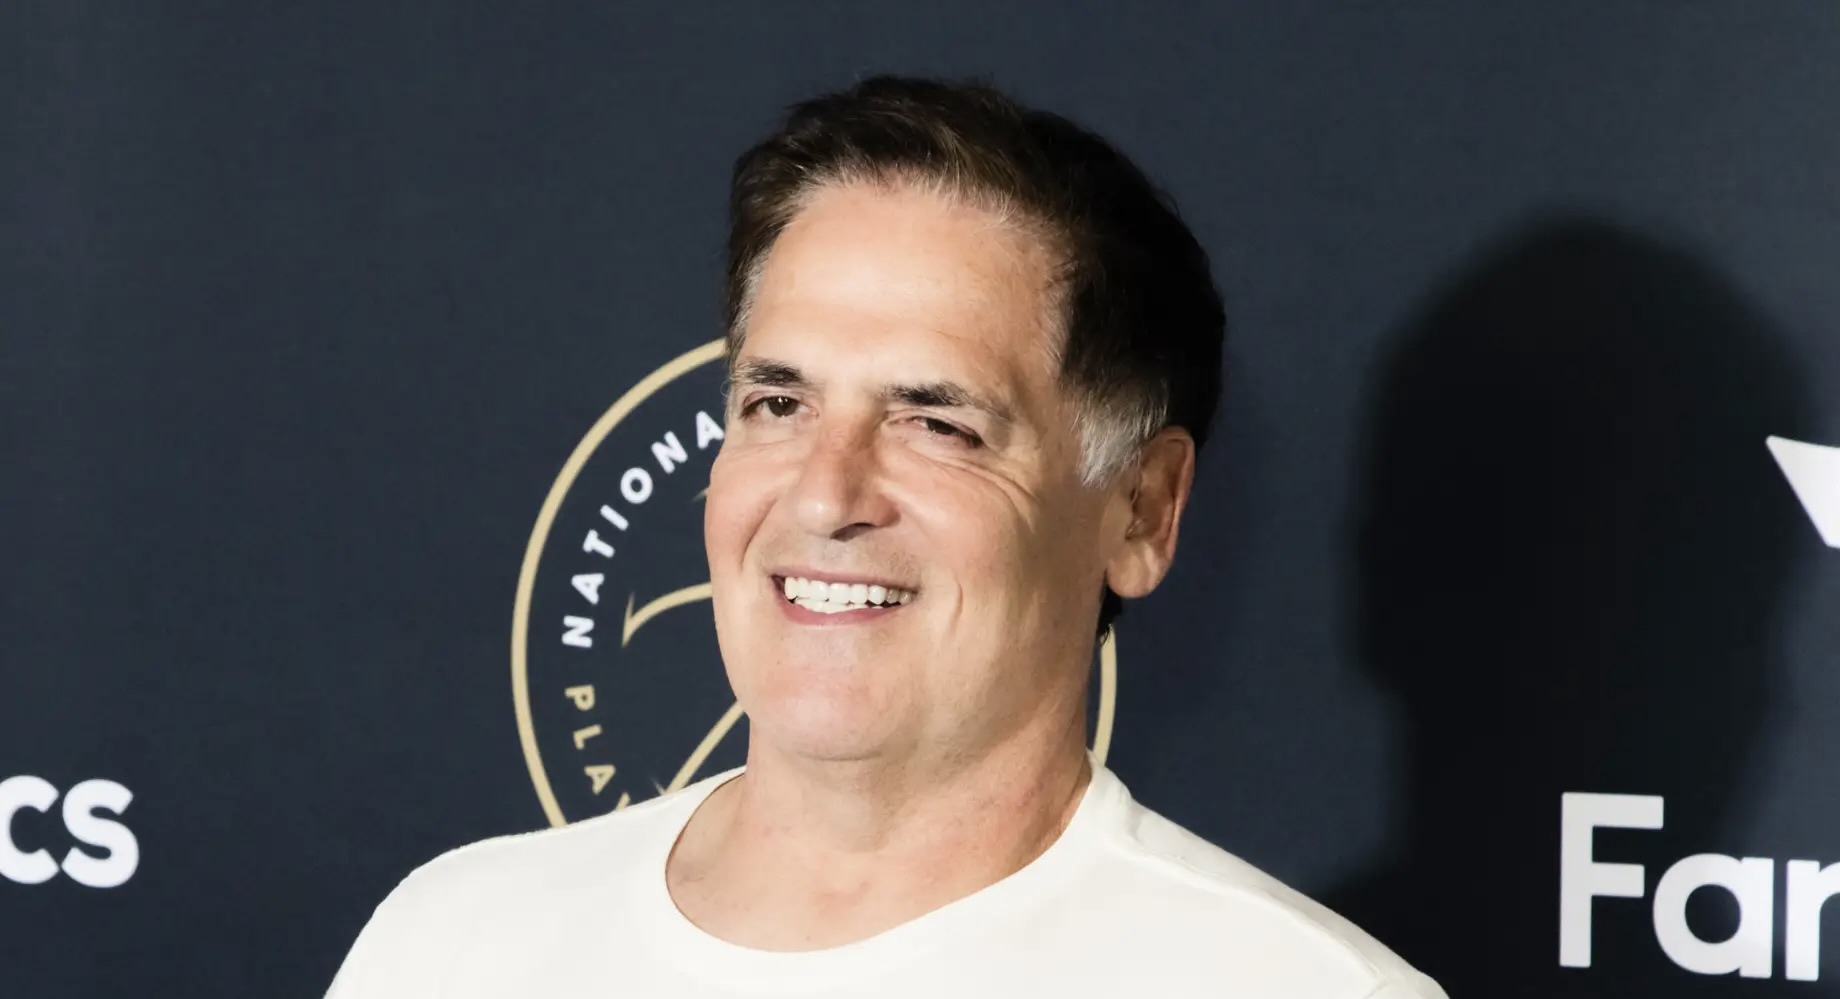 Mark Cuban Passed On $250,000 Uber Investment That Would Have Made Him $2.3 Billion [Video]